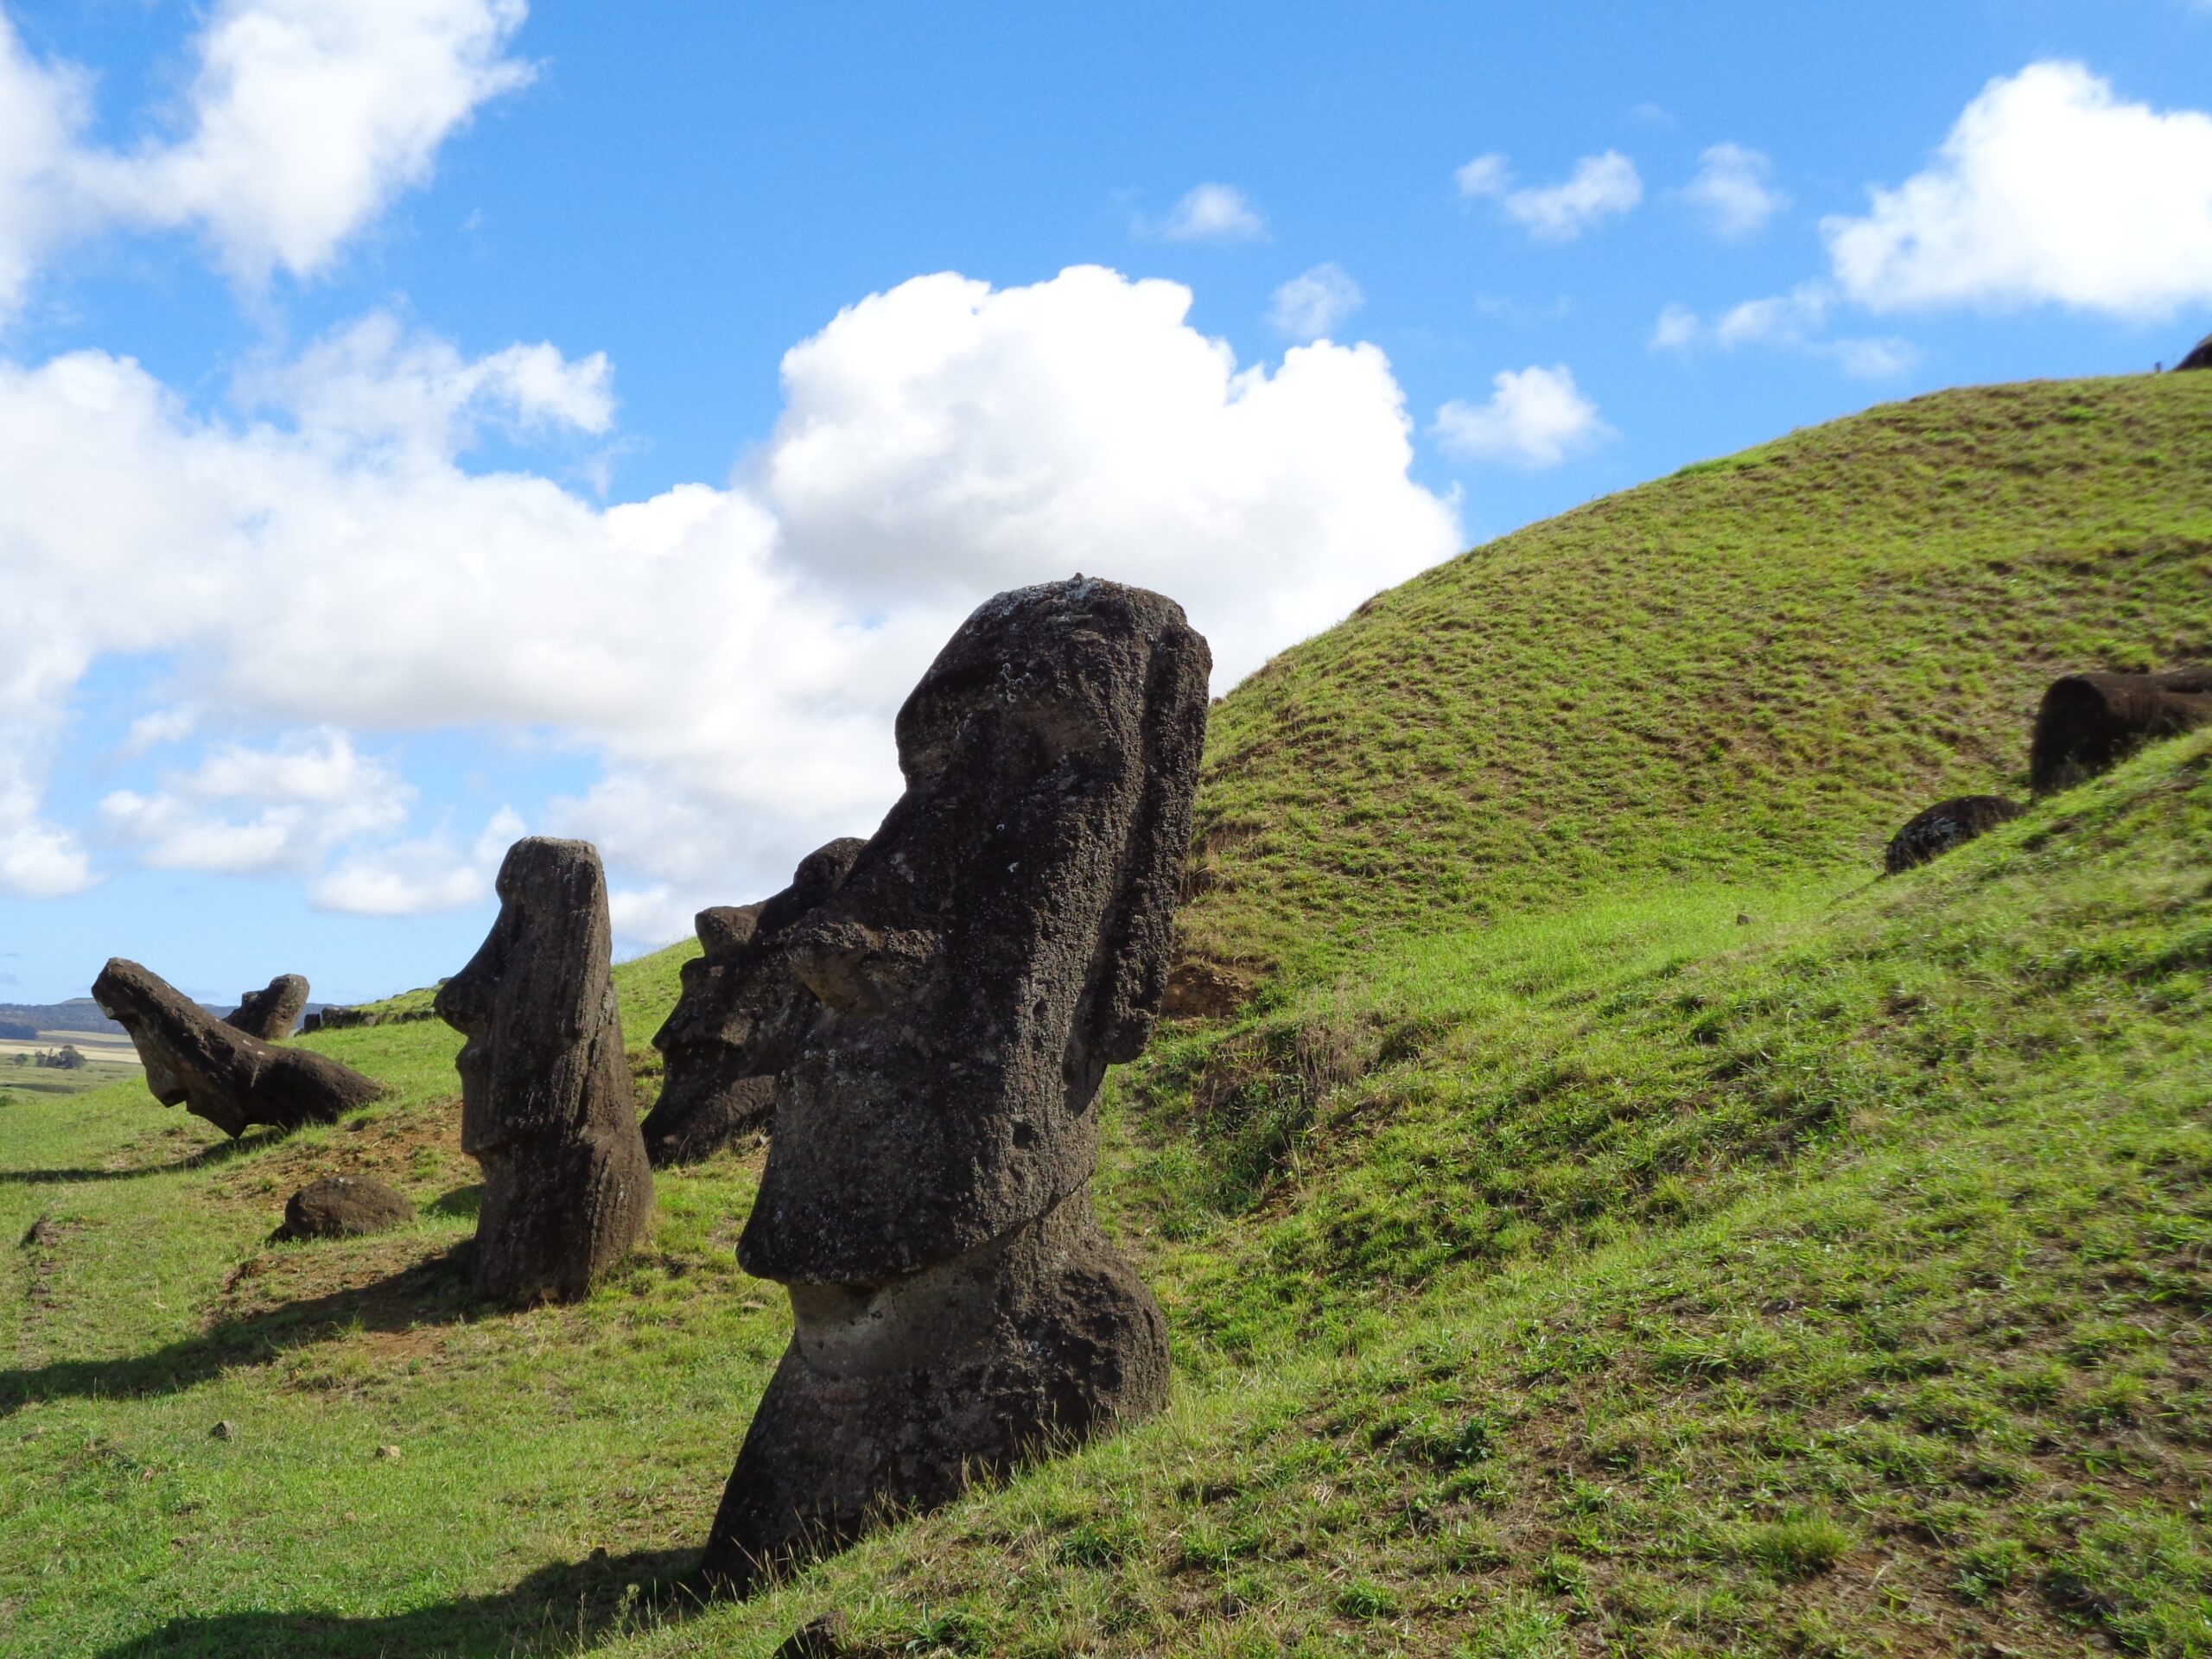 Easter Island’s 700-year-old Moai statues have been irreparably damaged by volcanic fire